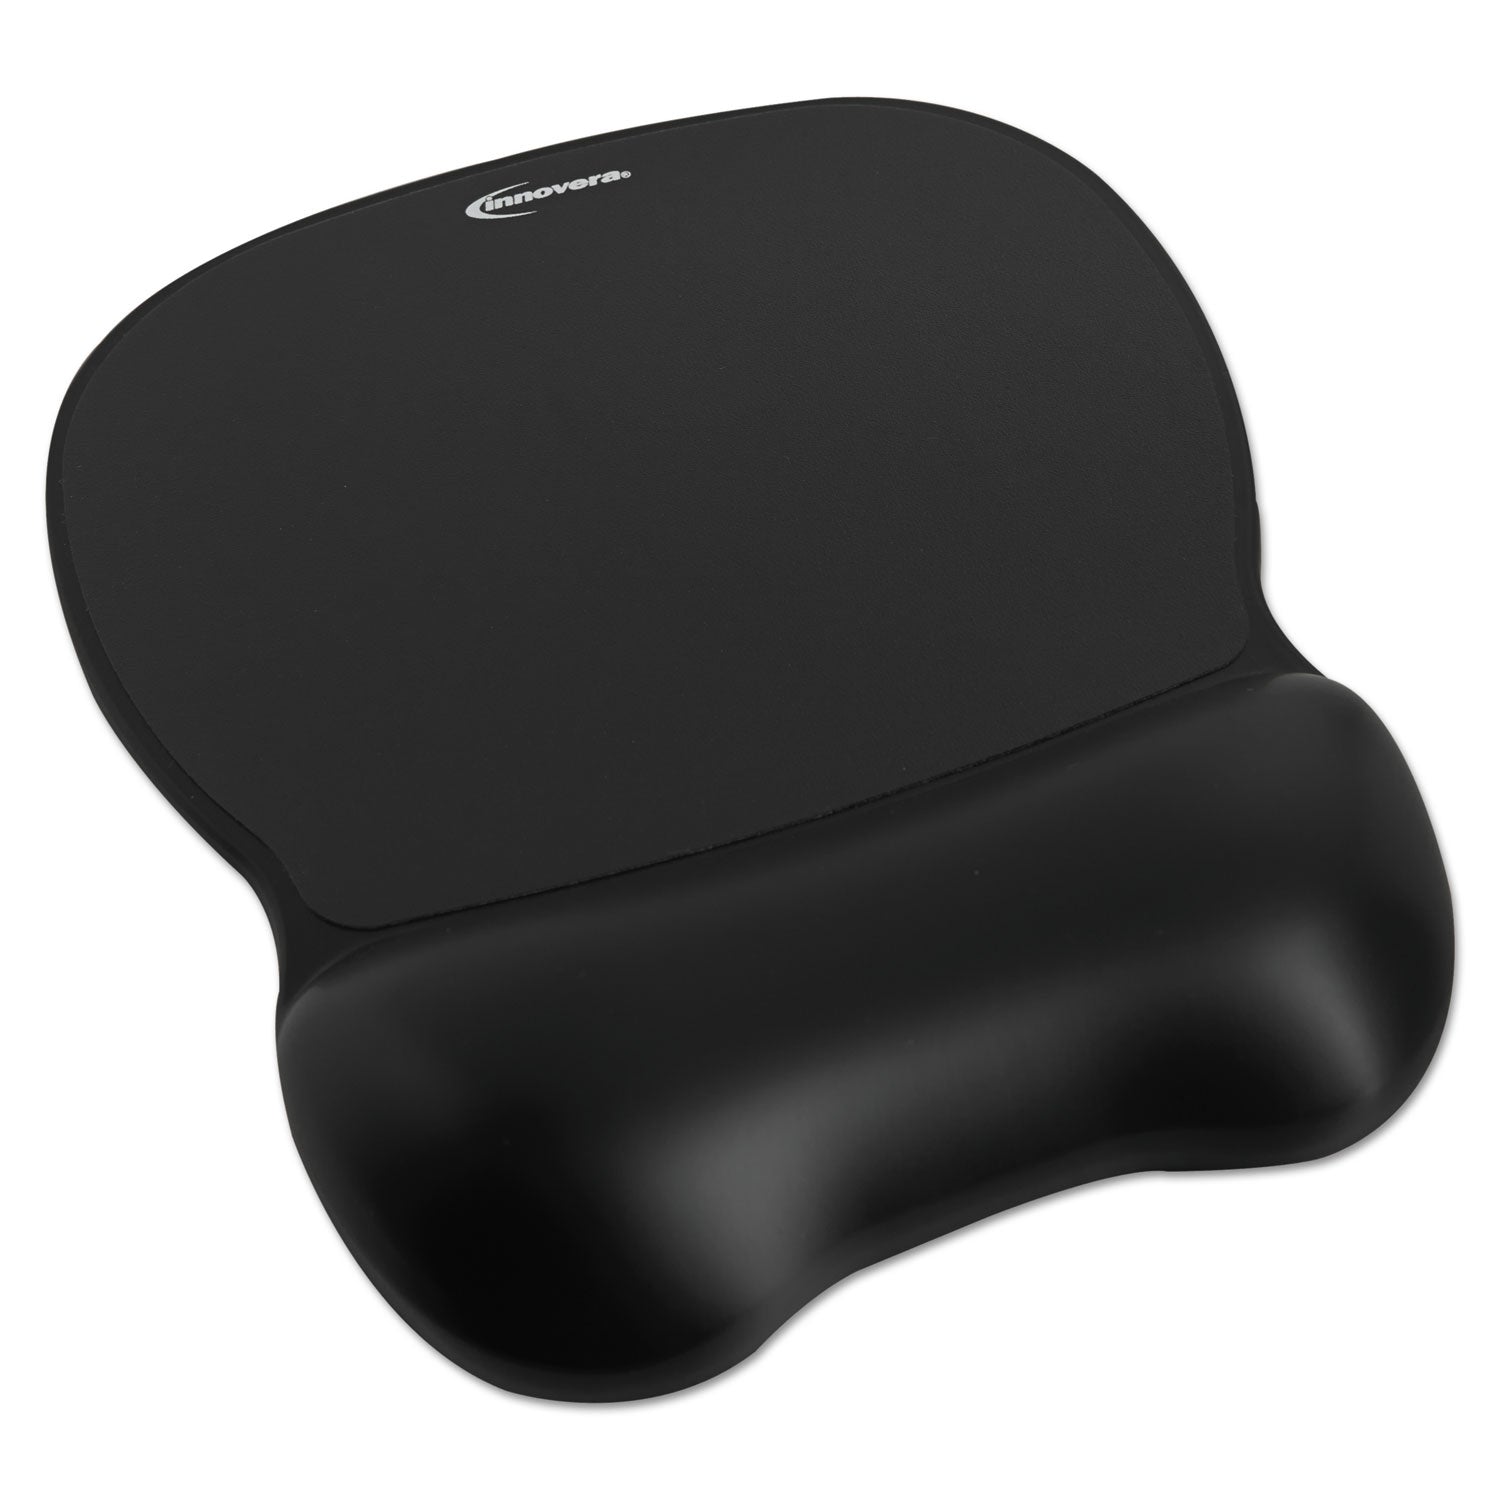 Gel Mouse Pad with Wrist Rest, 9.62 x 8.25, Black - 